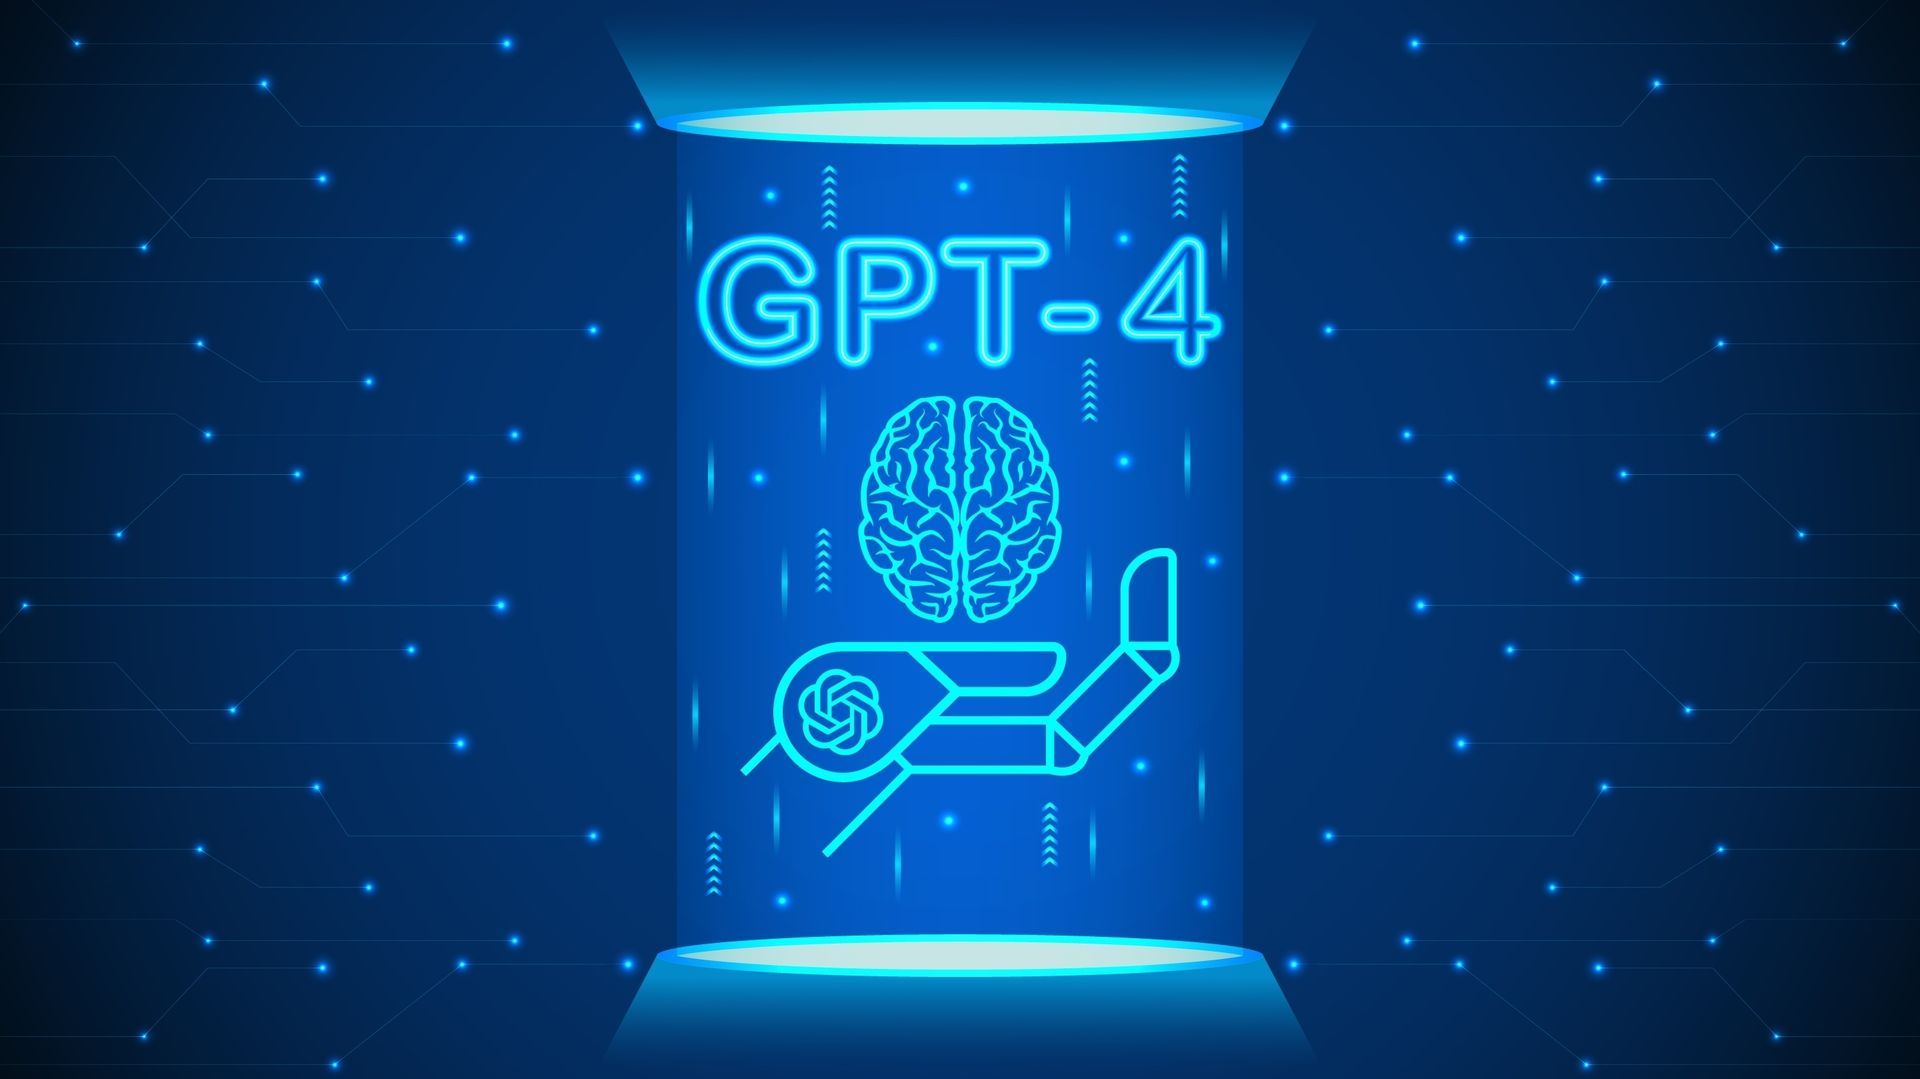 How to try GPT-4